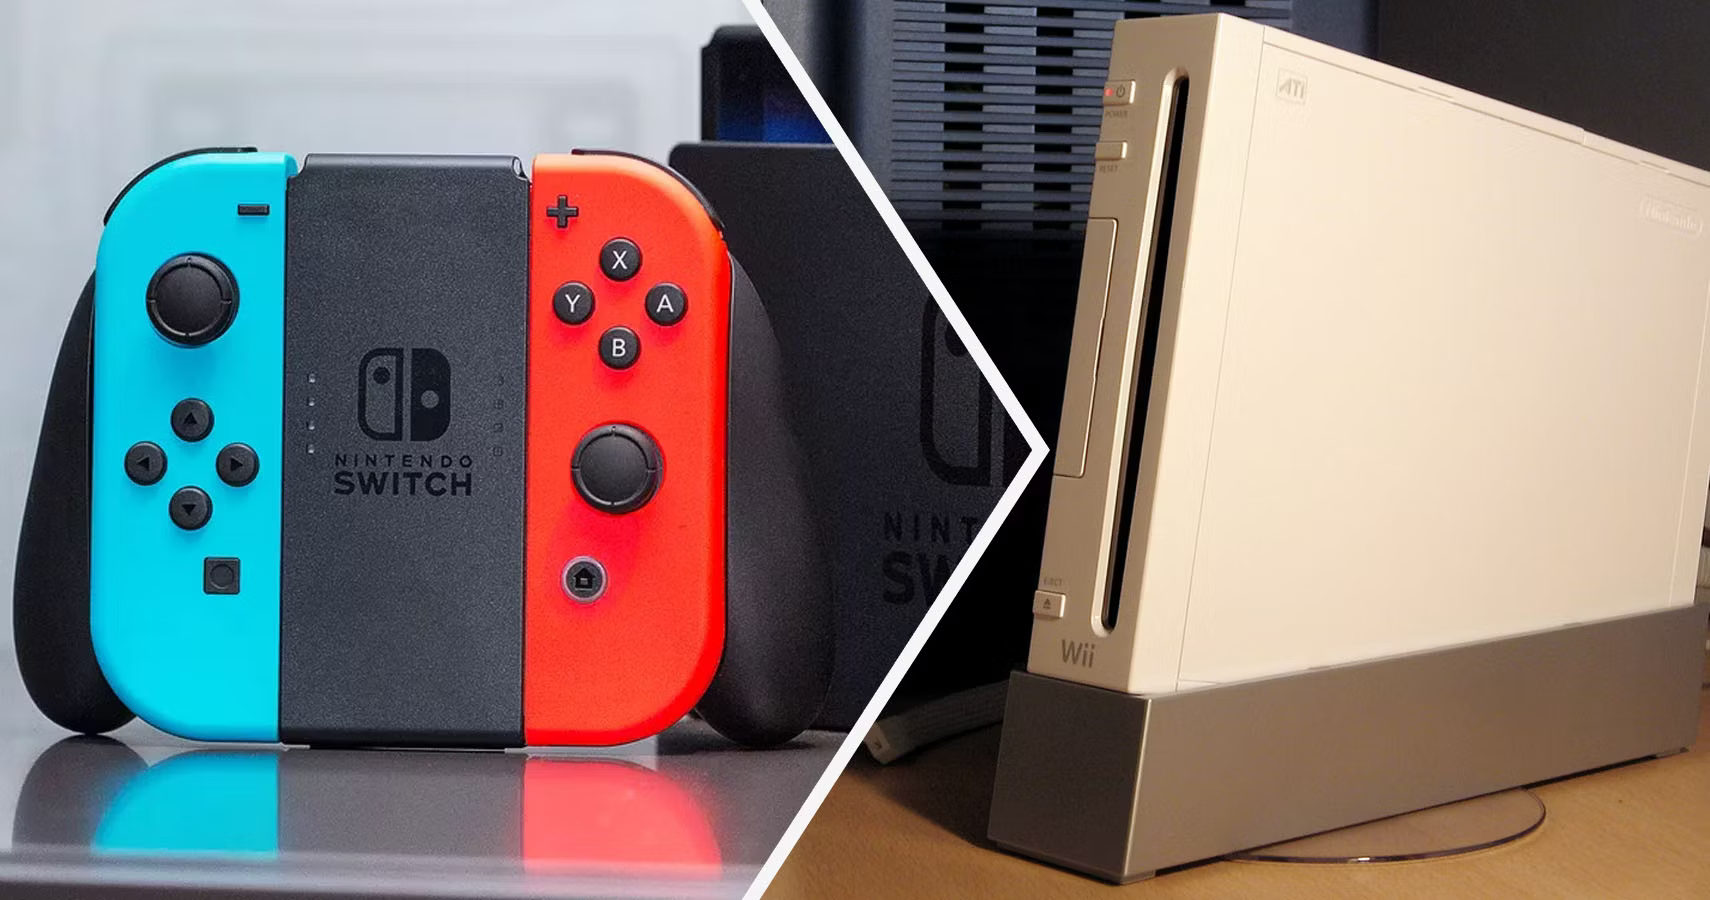 Nintendo Switch sales surpass lifetime Nintendo Wii sales in the US |  GBAtemp.net - The Independent Video Game Community